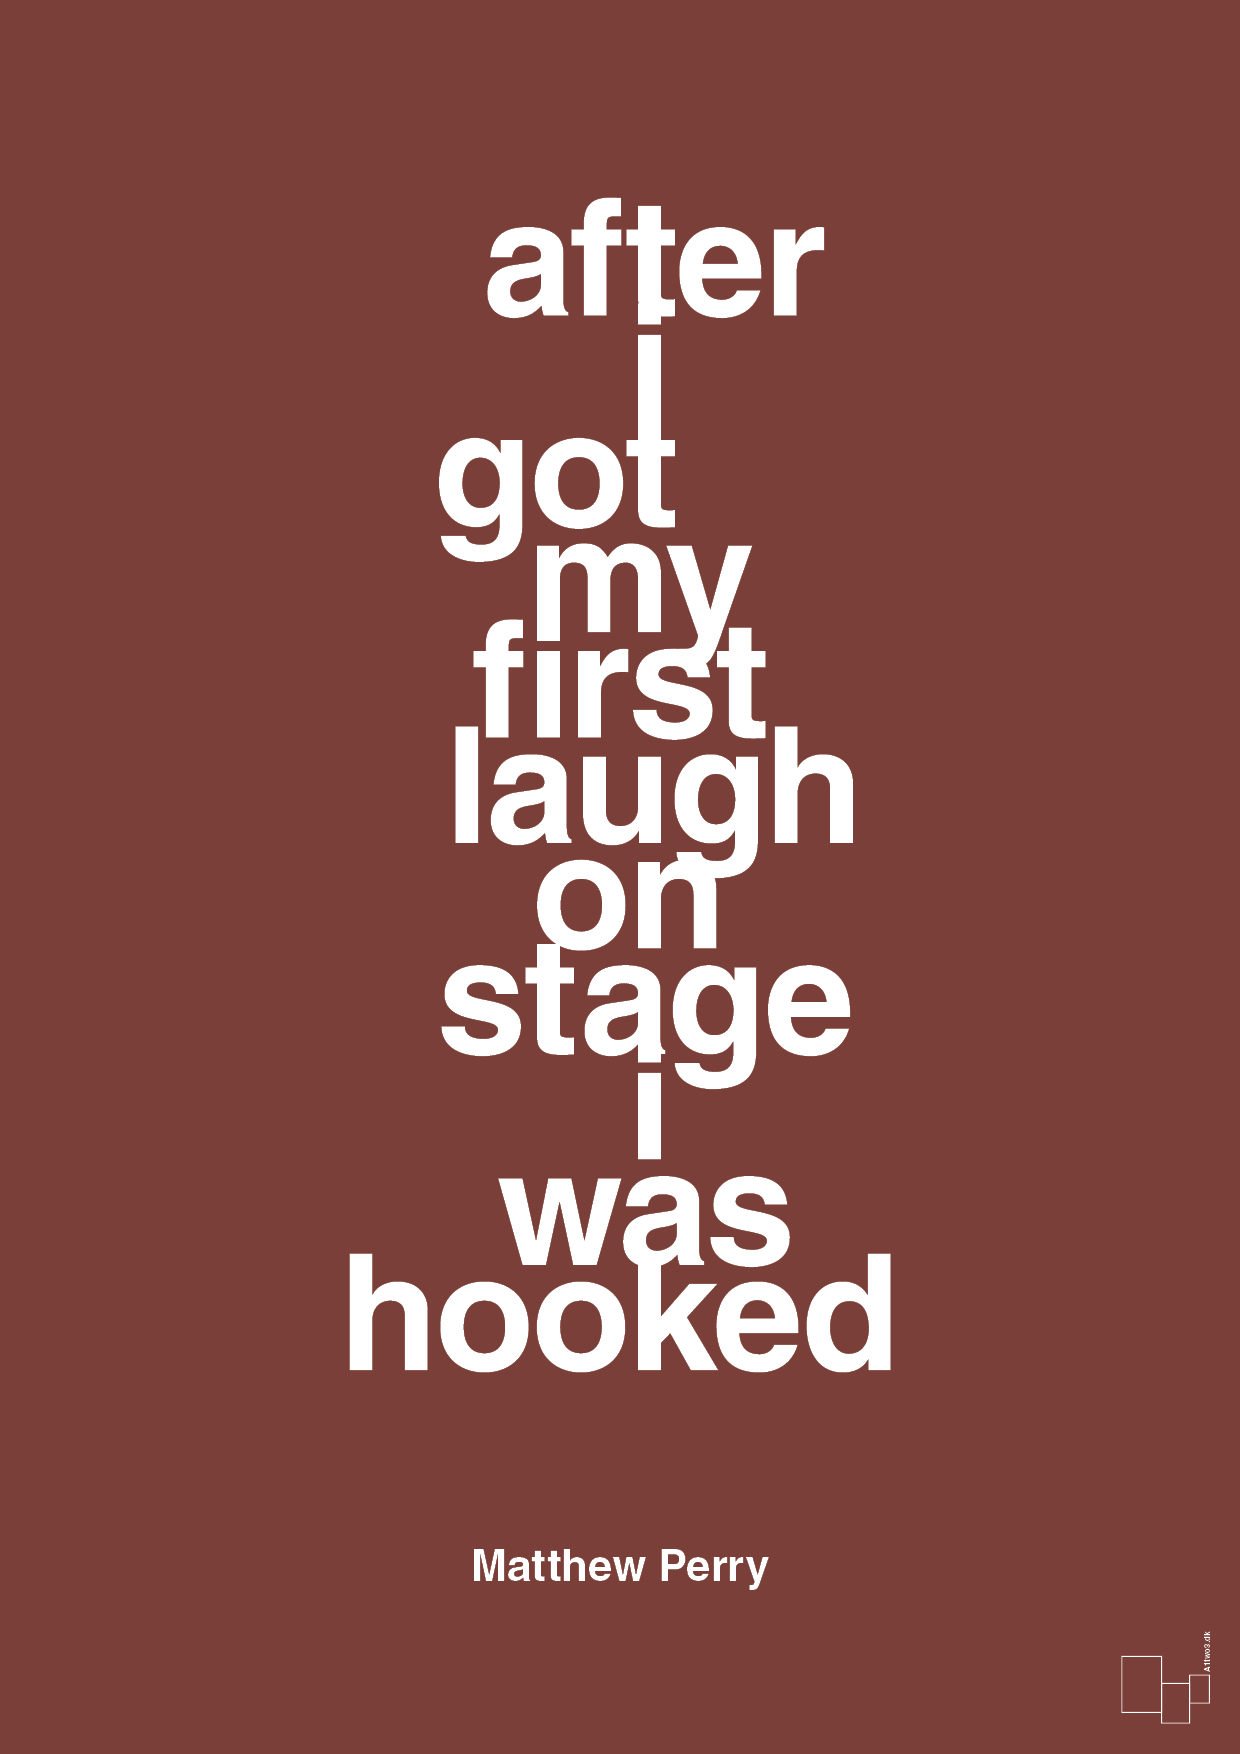 after i got my first laugh on stage i was hooked - Plakat med Citater i Red Pepper